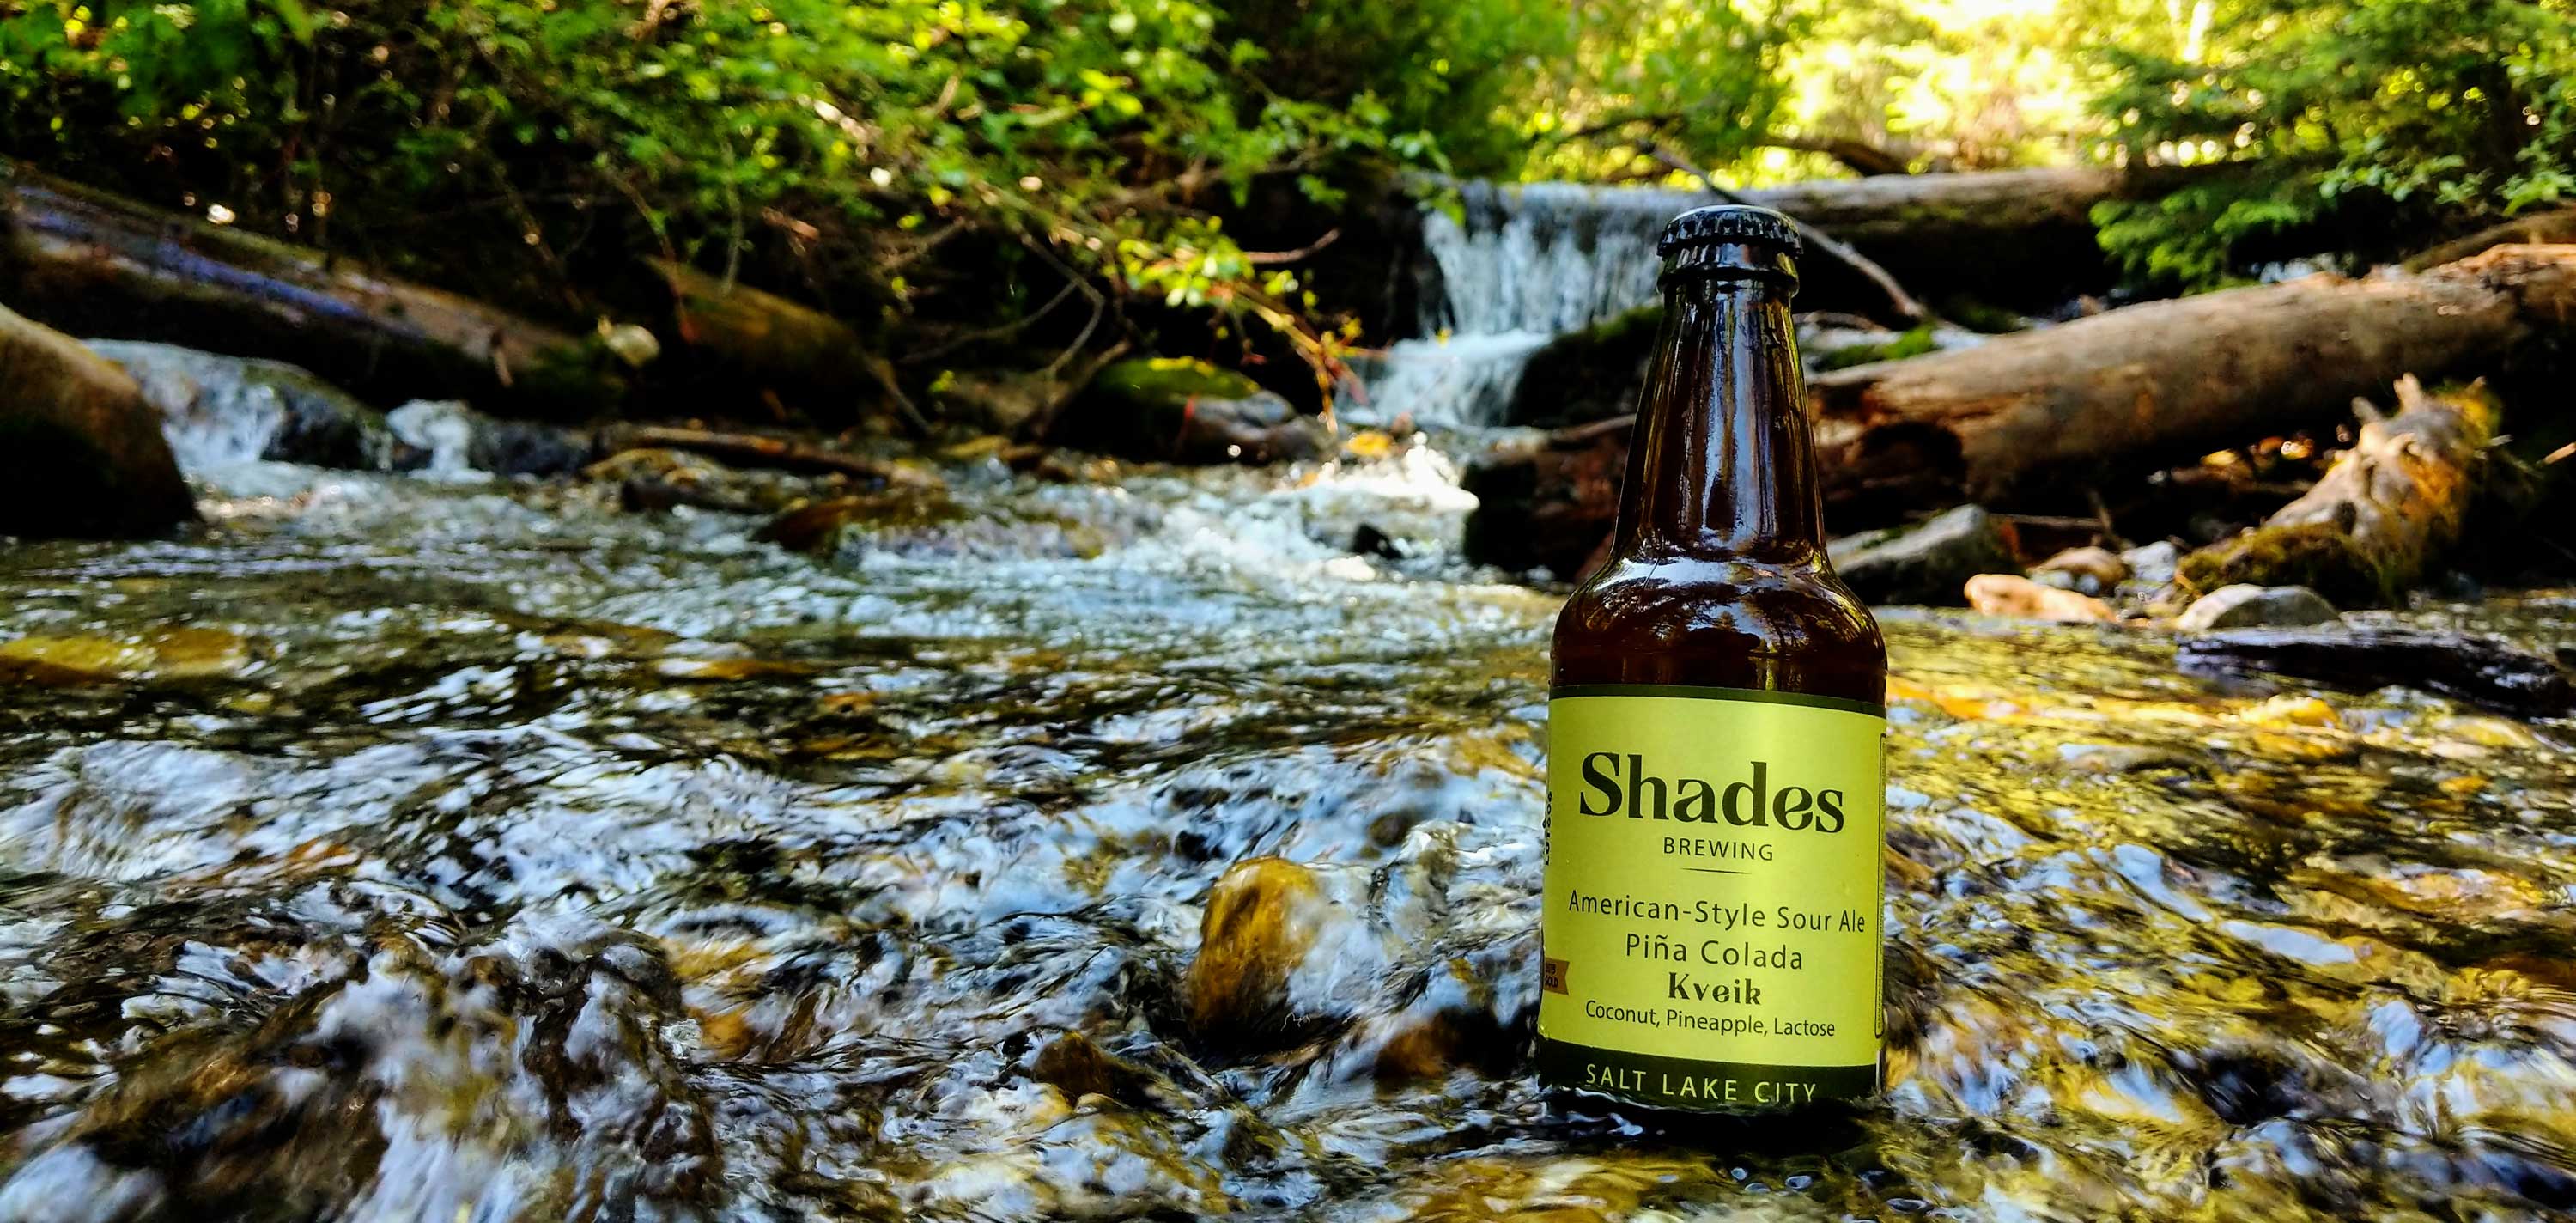 One of our favorite beers in a stream.